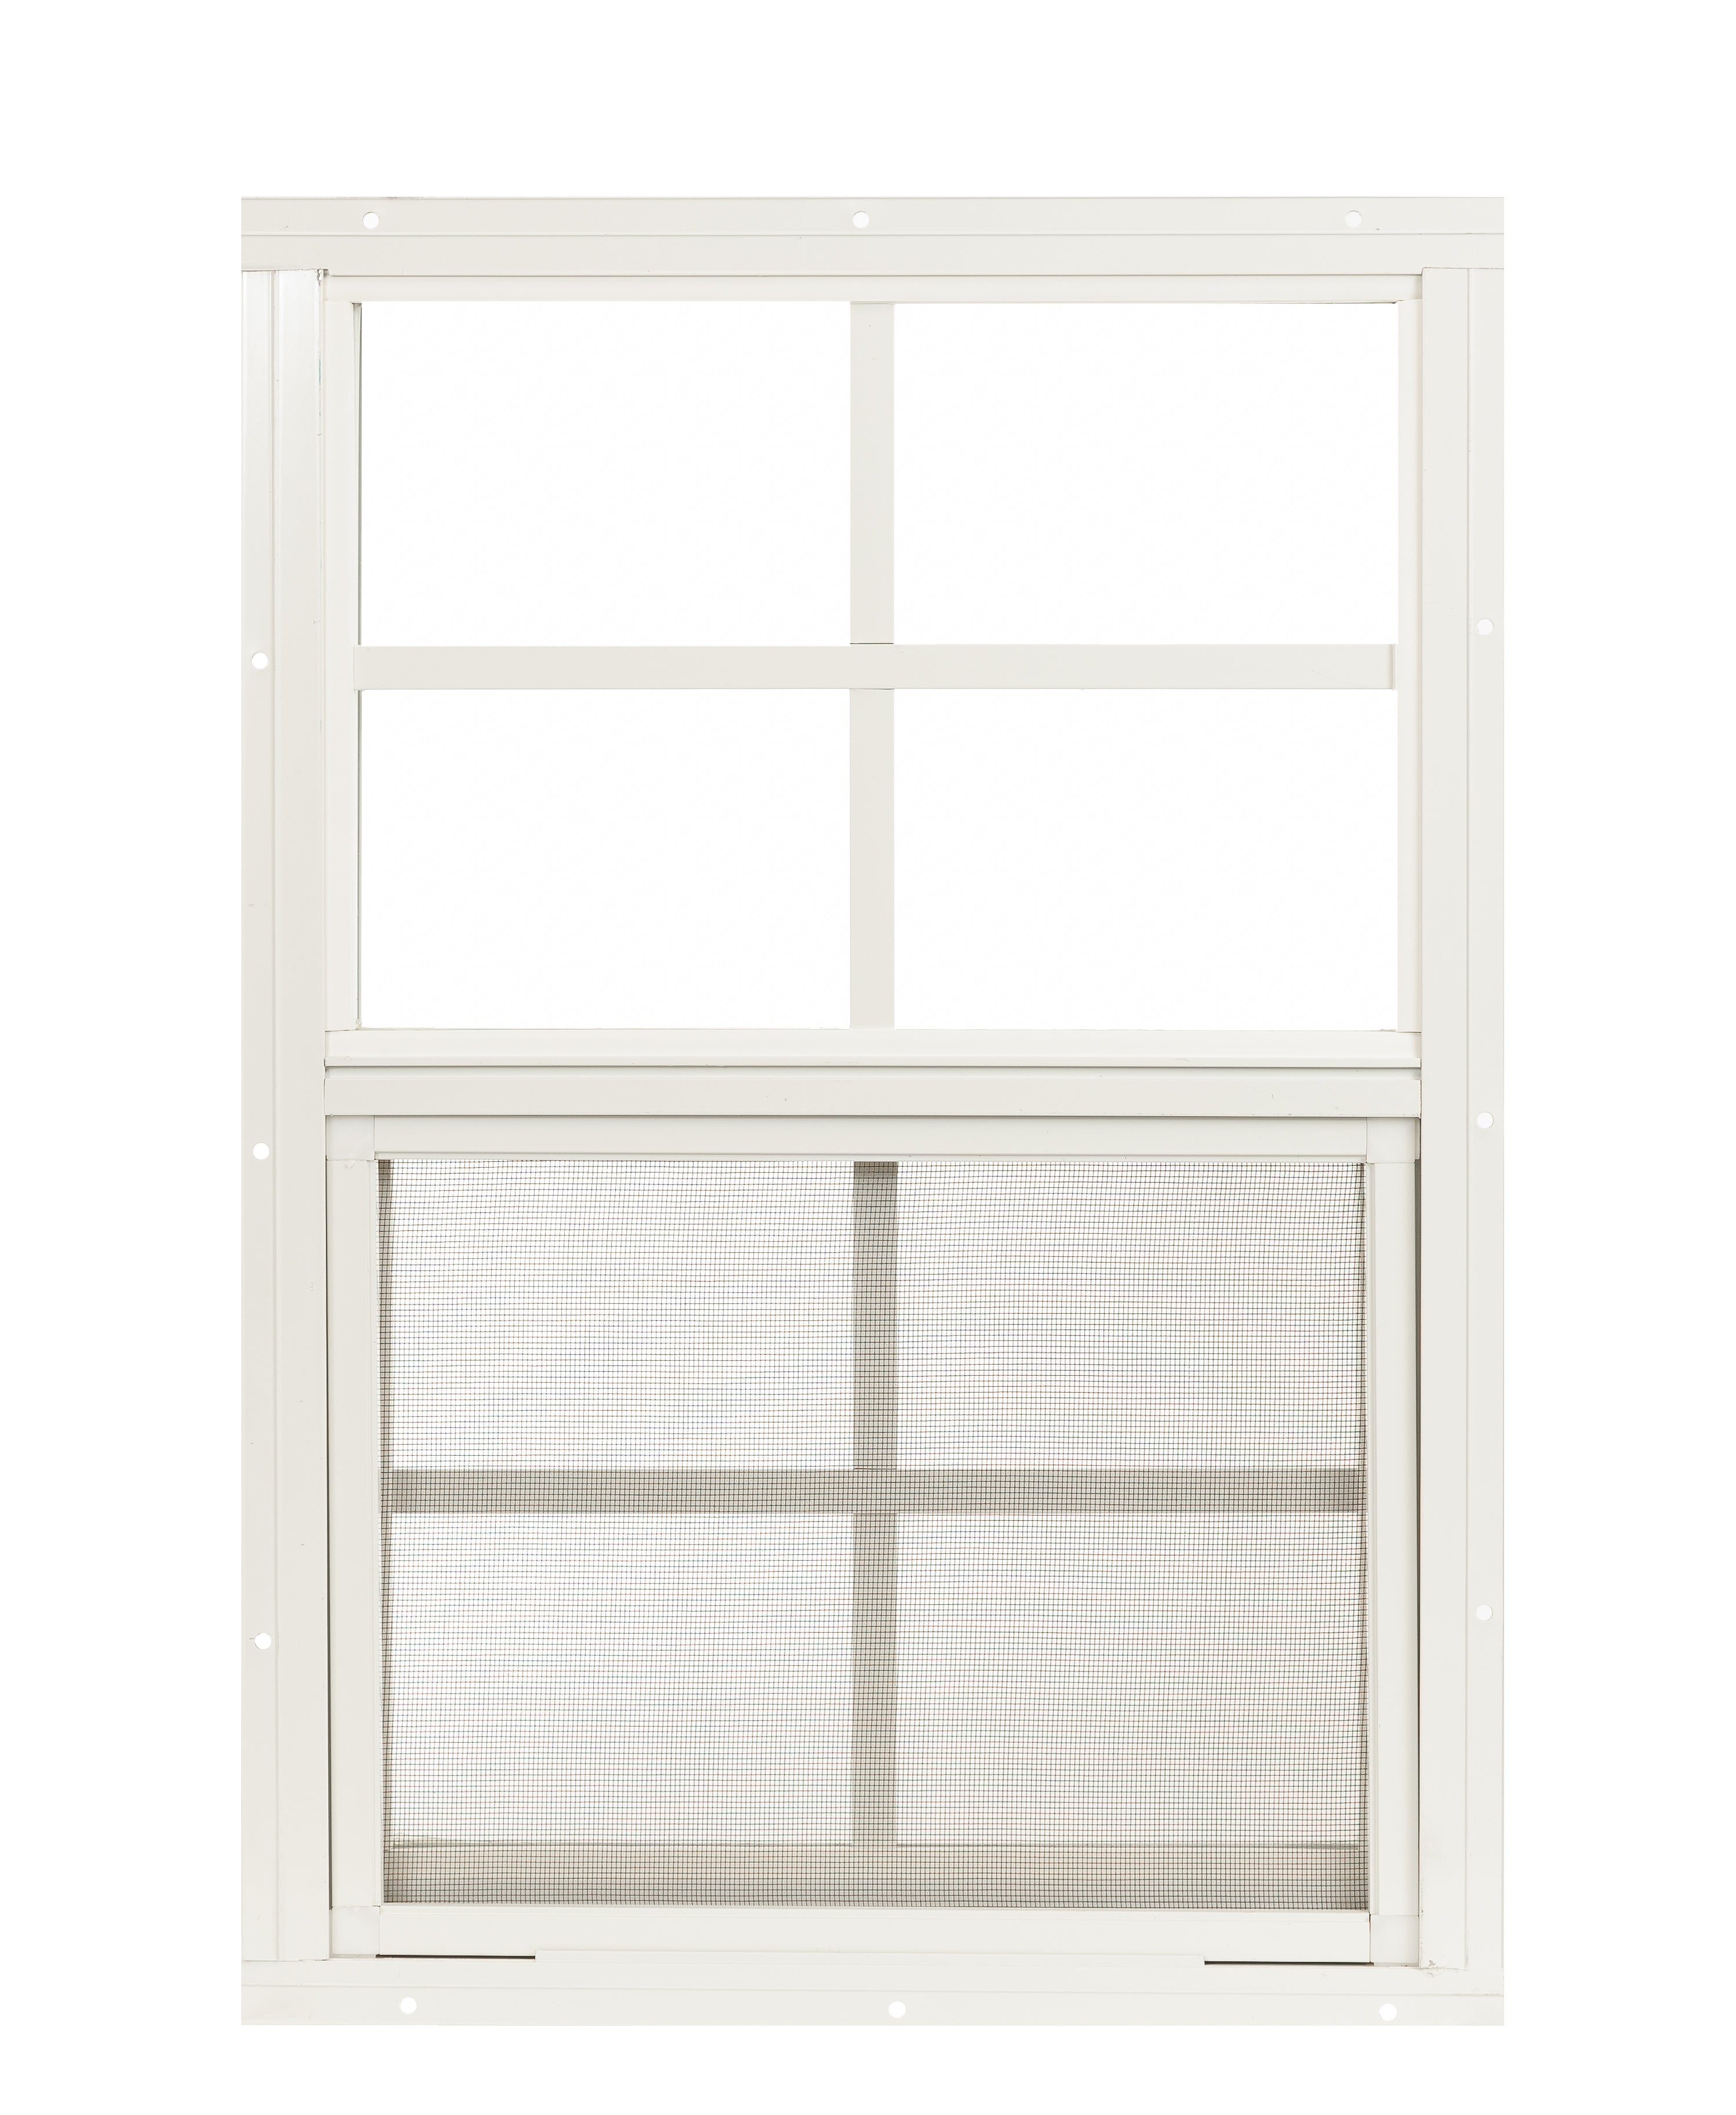 14" W x 21" H Single Hung Flush Mount White Window  with Grids for Sheds, Playhouses, and MORE